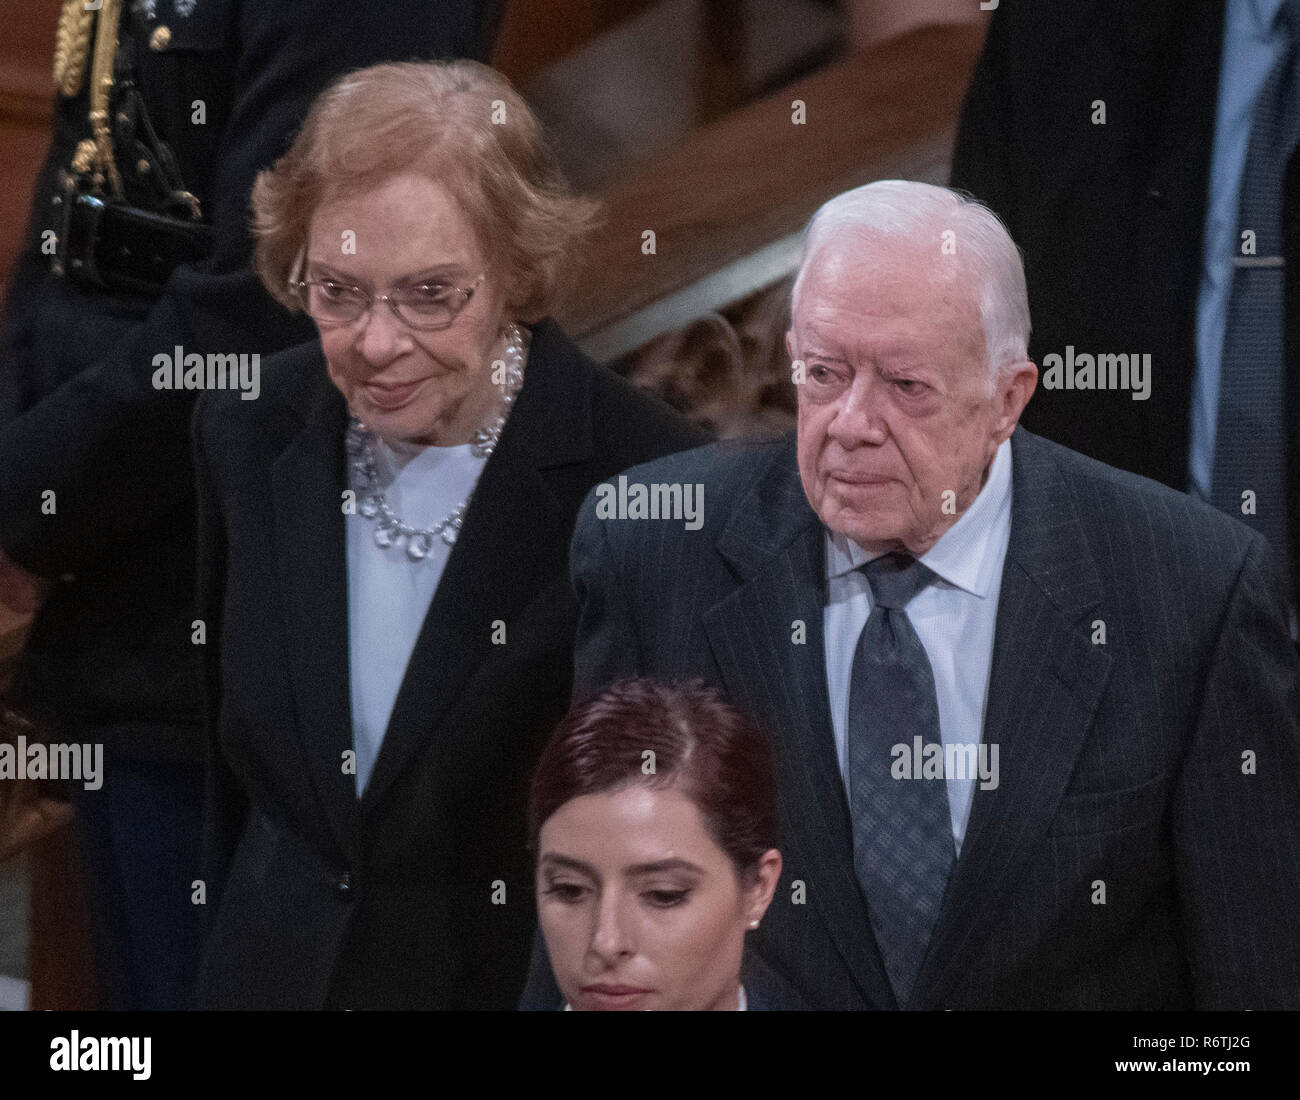 Washington, United States Of America. 05th Dec, 2018. Former United States President Jimmy Carter, right, and former first lady Rosalynn Carter, left, depart following the National funeral service in honor of the late former US President George H.W. Bush at the Washington National Cathedral in Washington, DC on Wednesday, December 5, 2018. Credit: Ron Sachs/CNP (RESTRICTION: NO New York or New Jersey Newspapers or newspapers within a 75 mile radius of New York City) | usage worldwide Credit: dpa/Alamy Live News Stock Photo